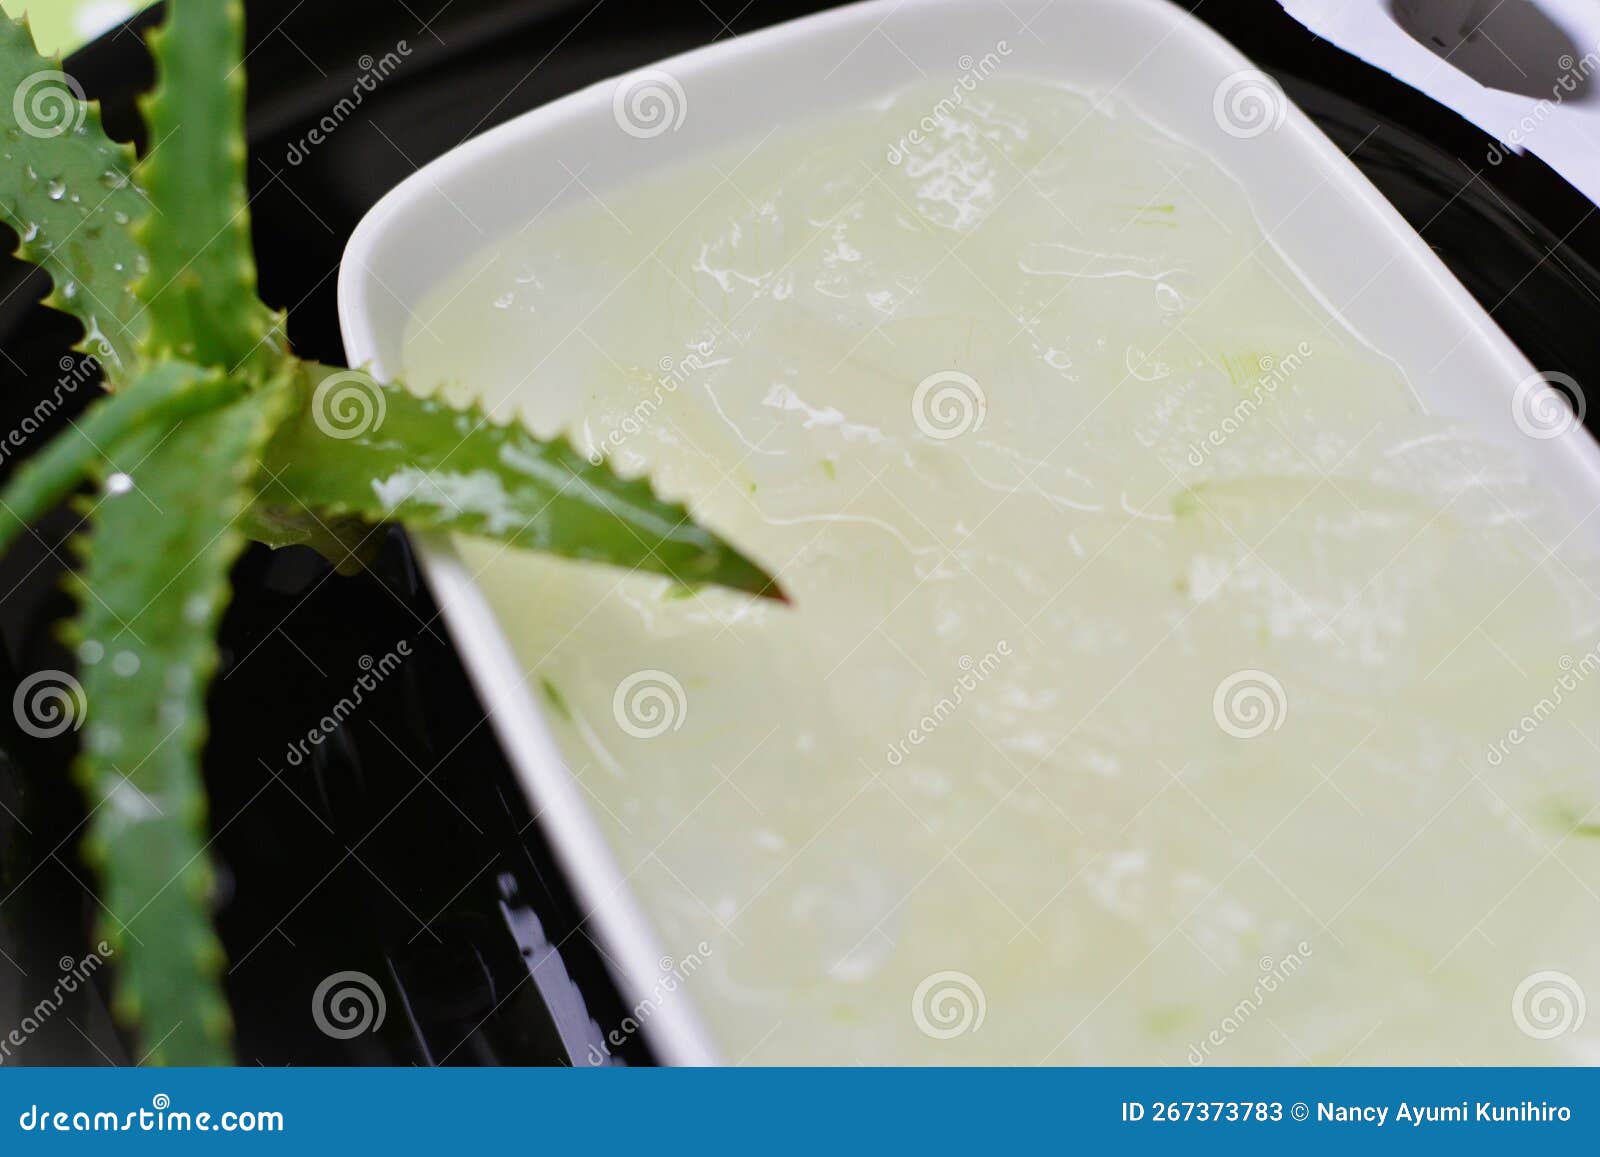 in the bowl the juice of the aloe vera